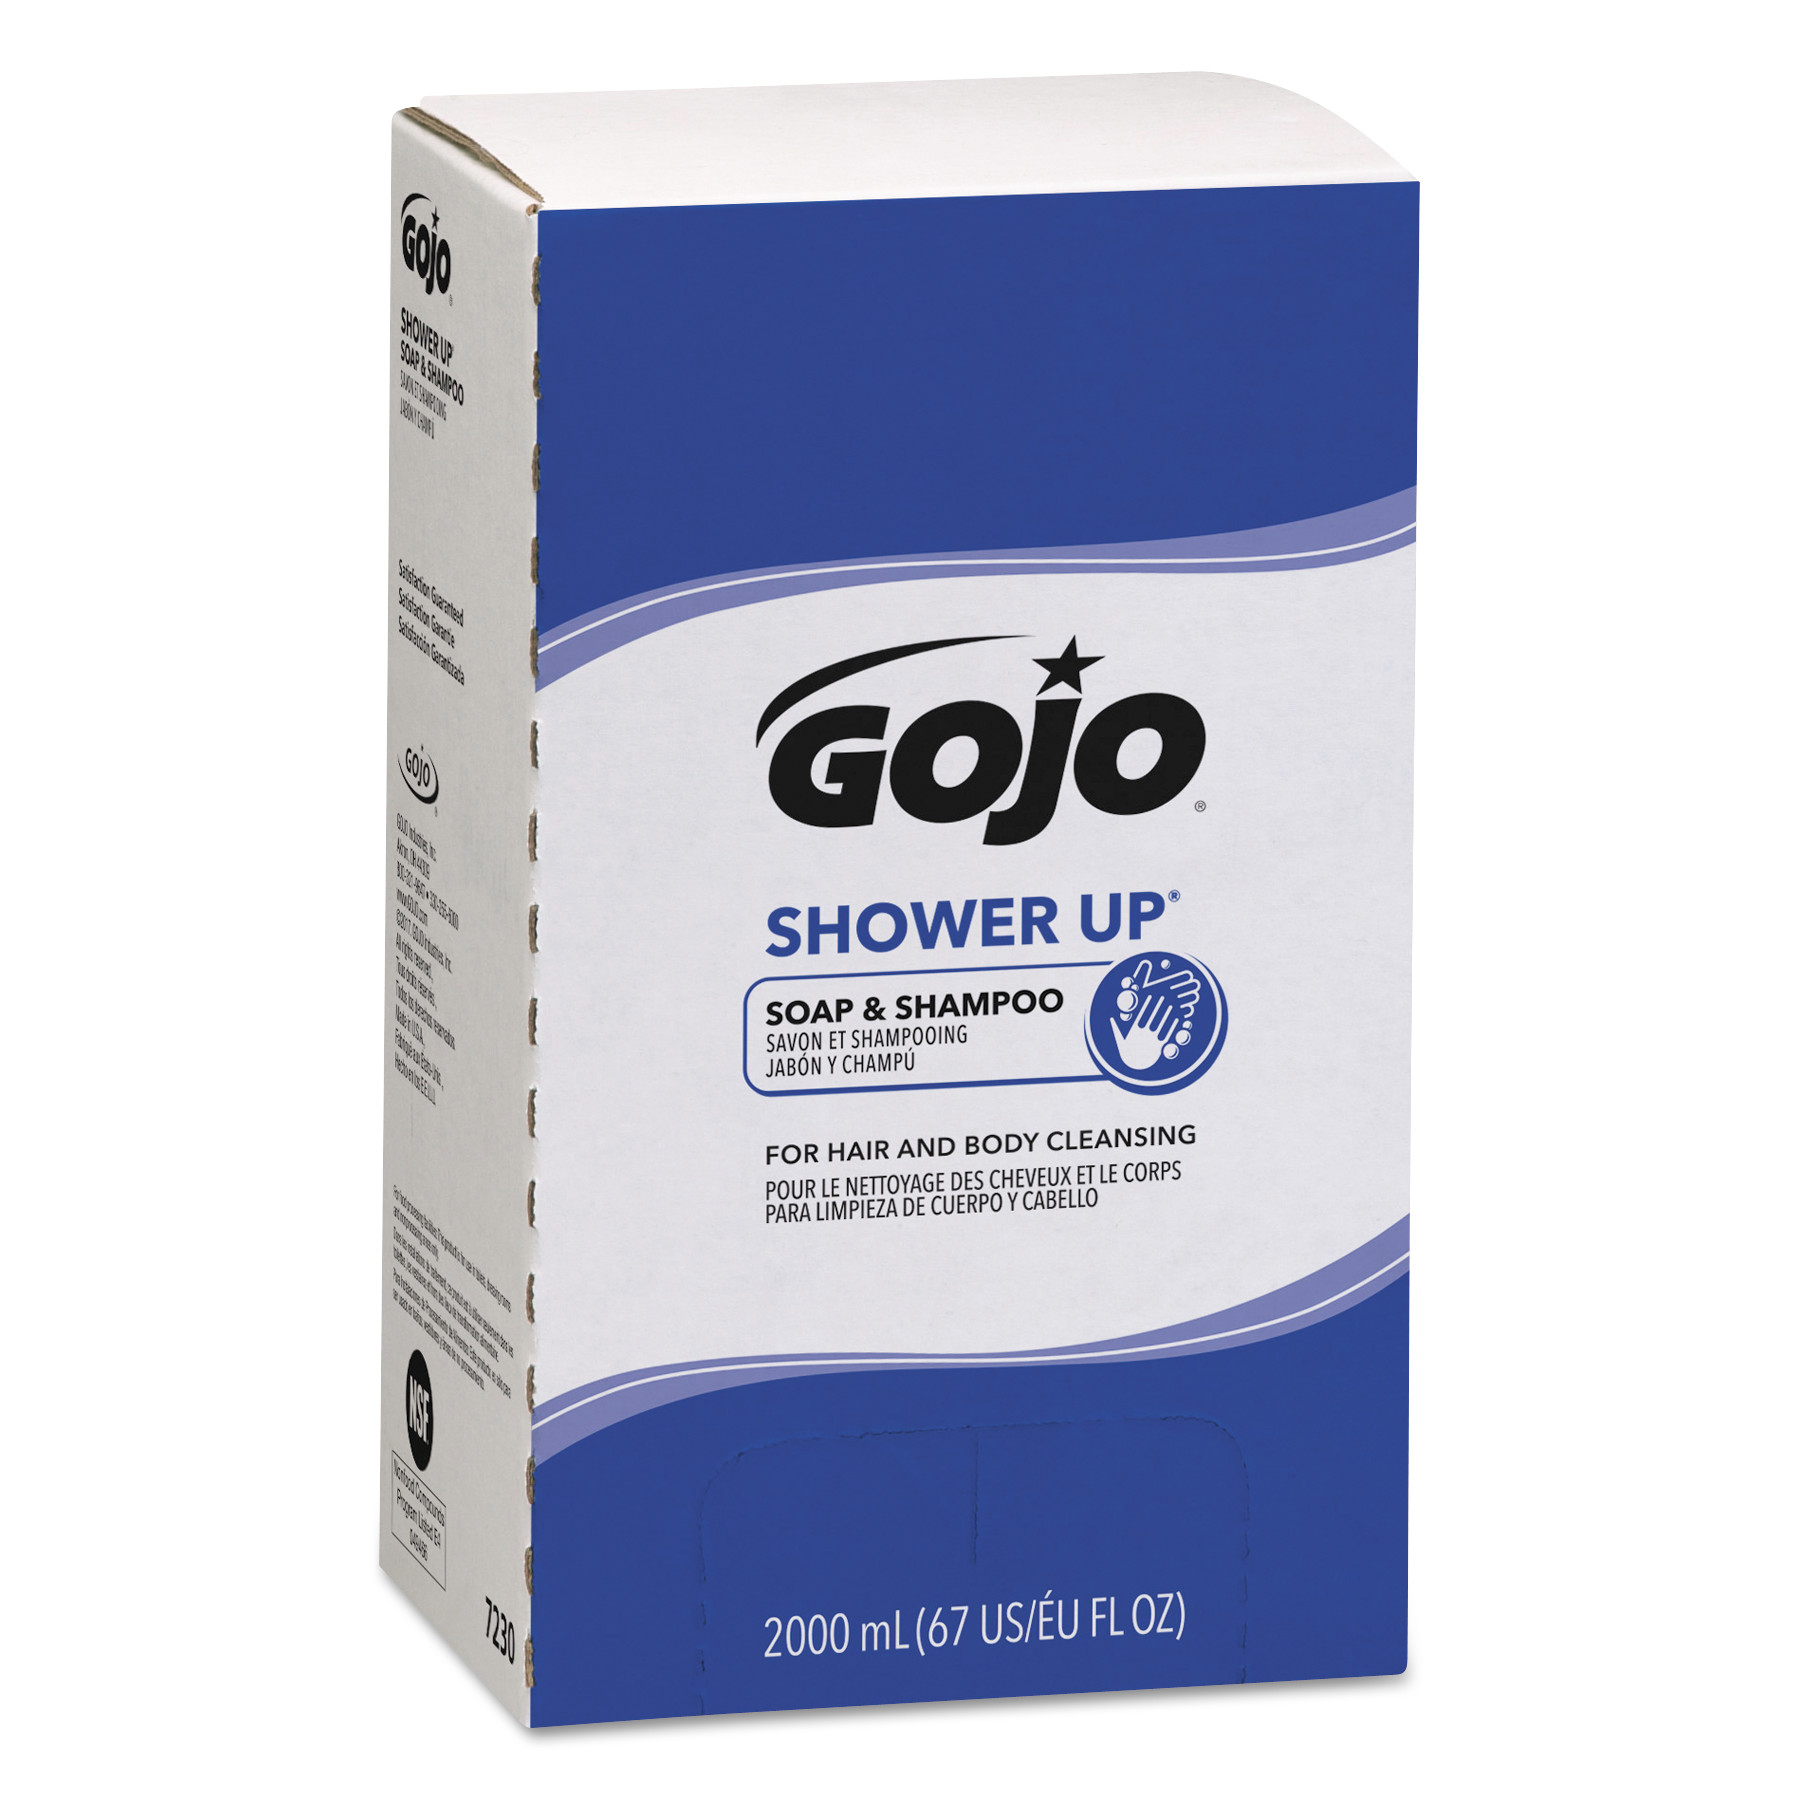  GOJO 7230-04 SHOWER UP Soap and Shampoo, Rose Colored, Pleasant Scent, 2000mL Refill, 4/CT (GOJ7230) 